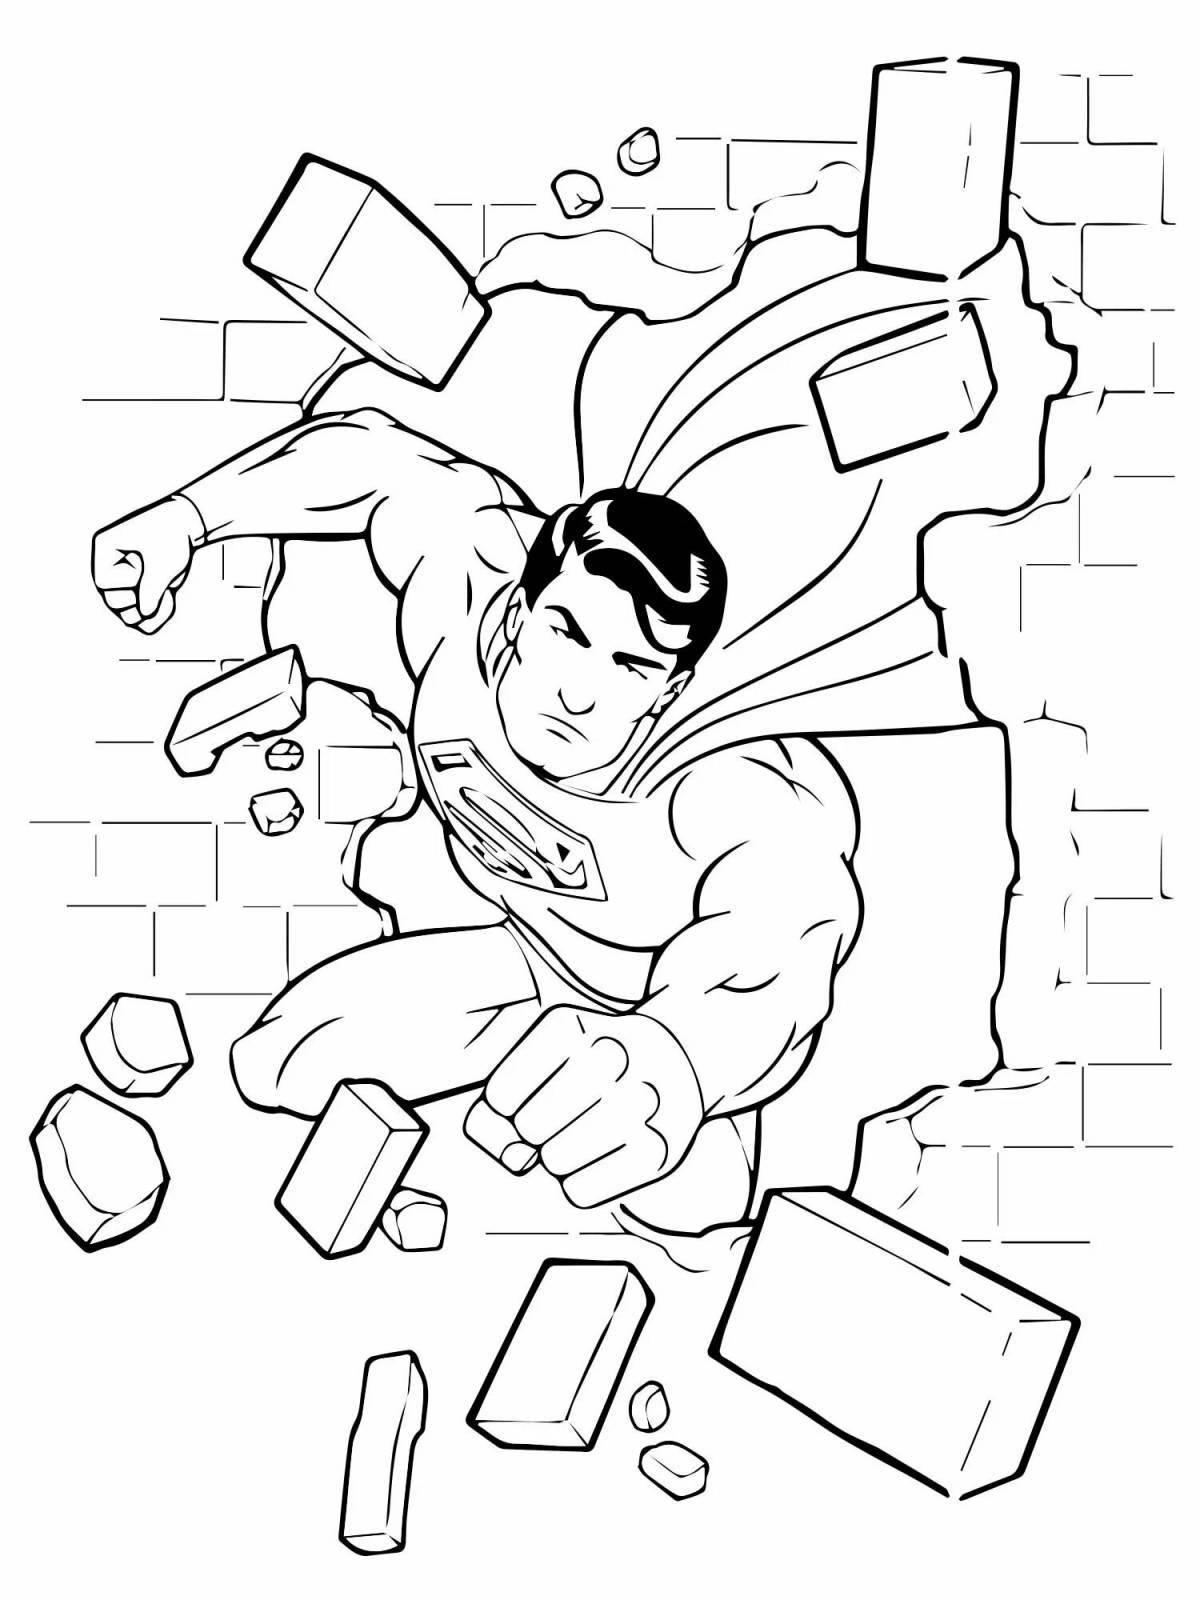 Coloring awesome ace superhero